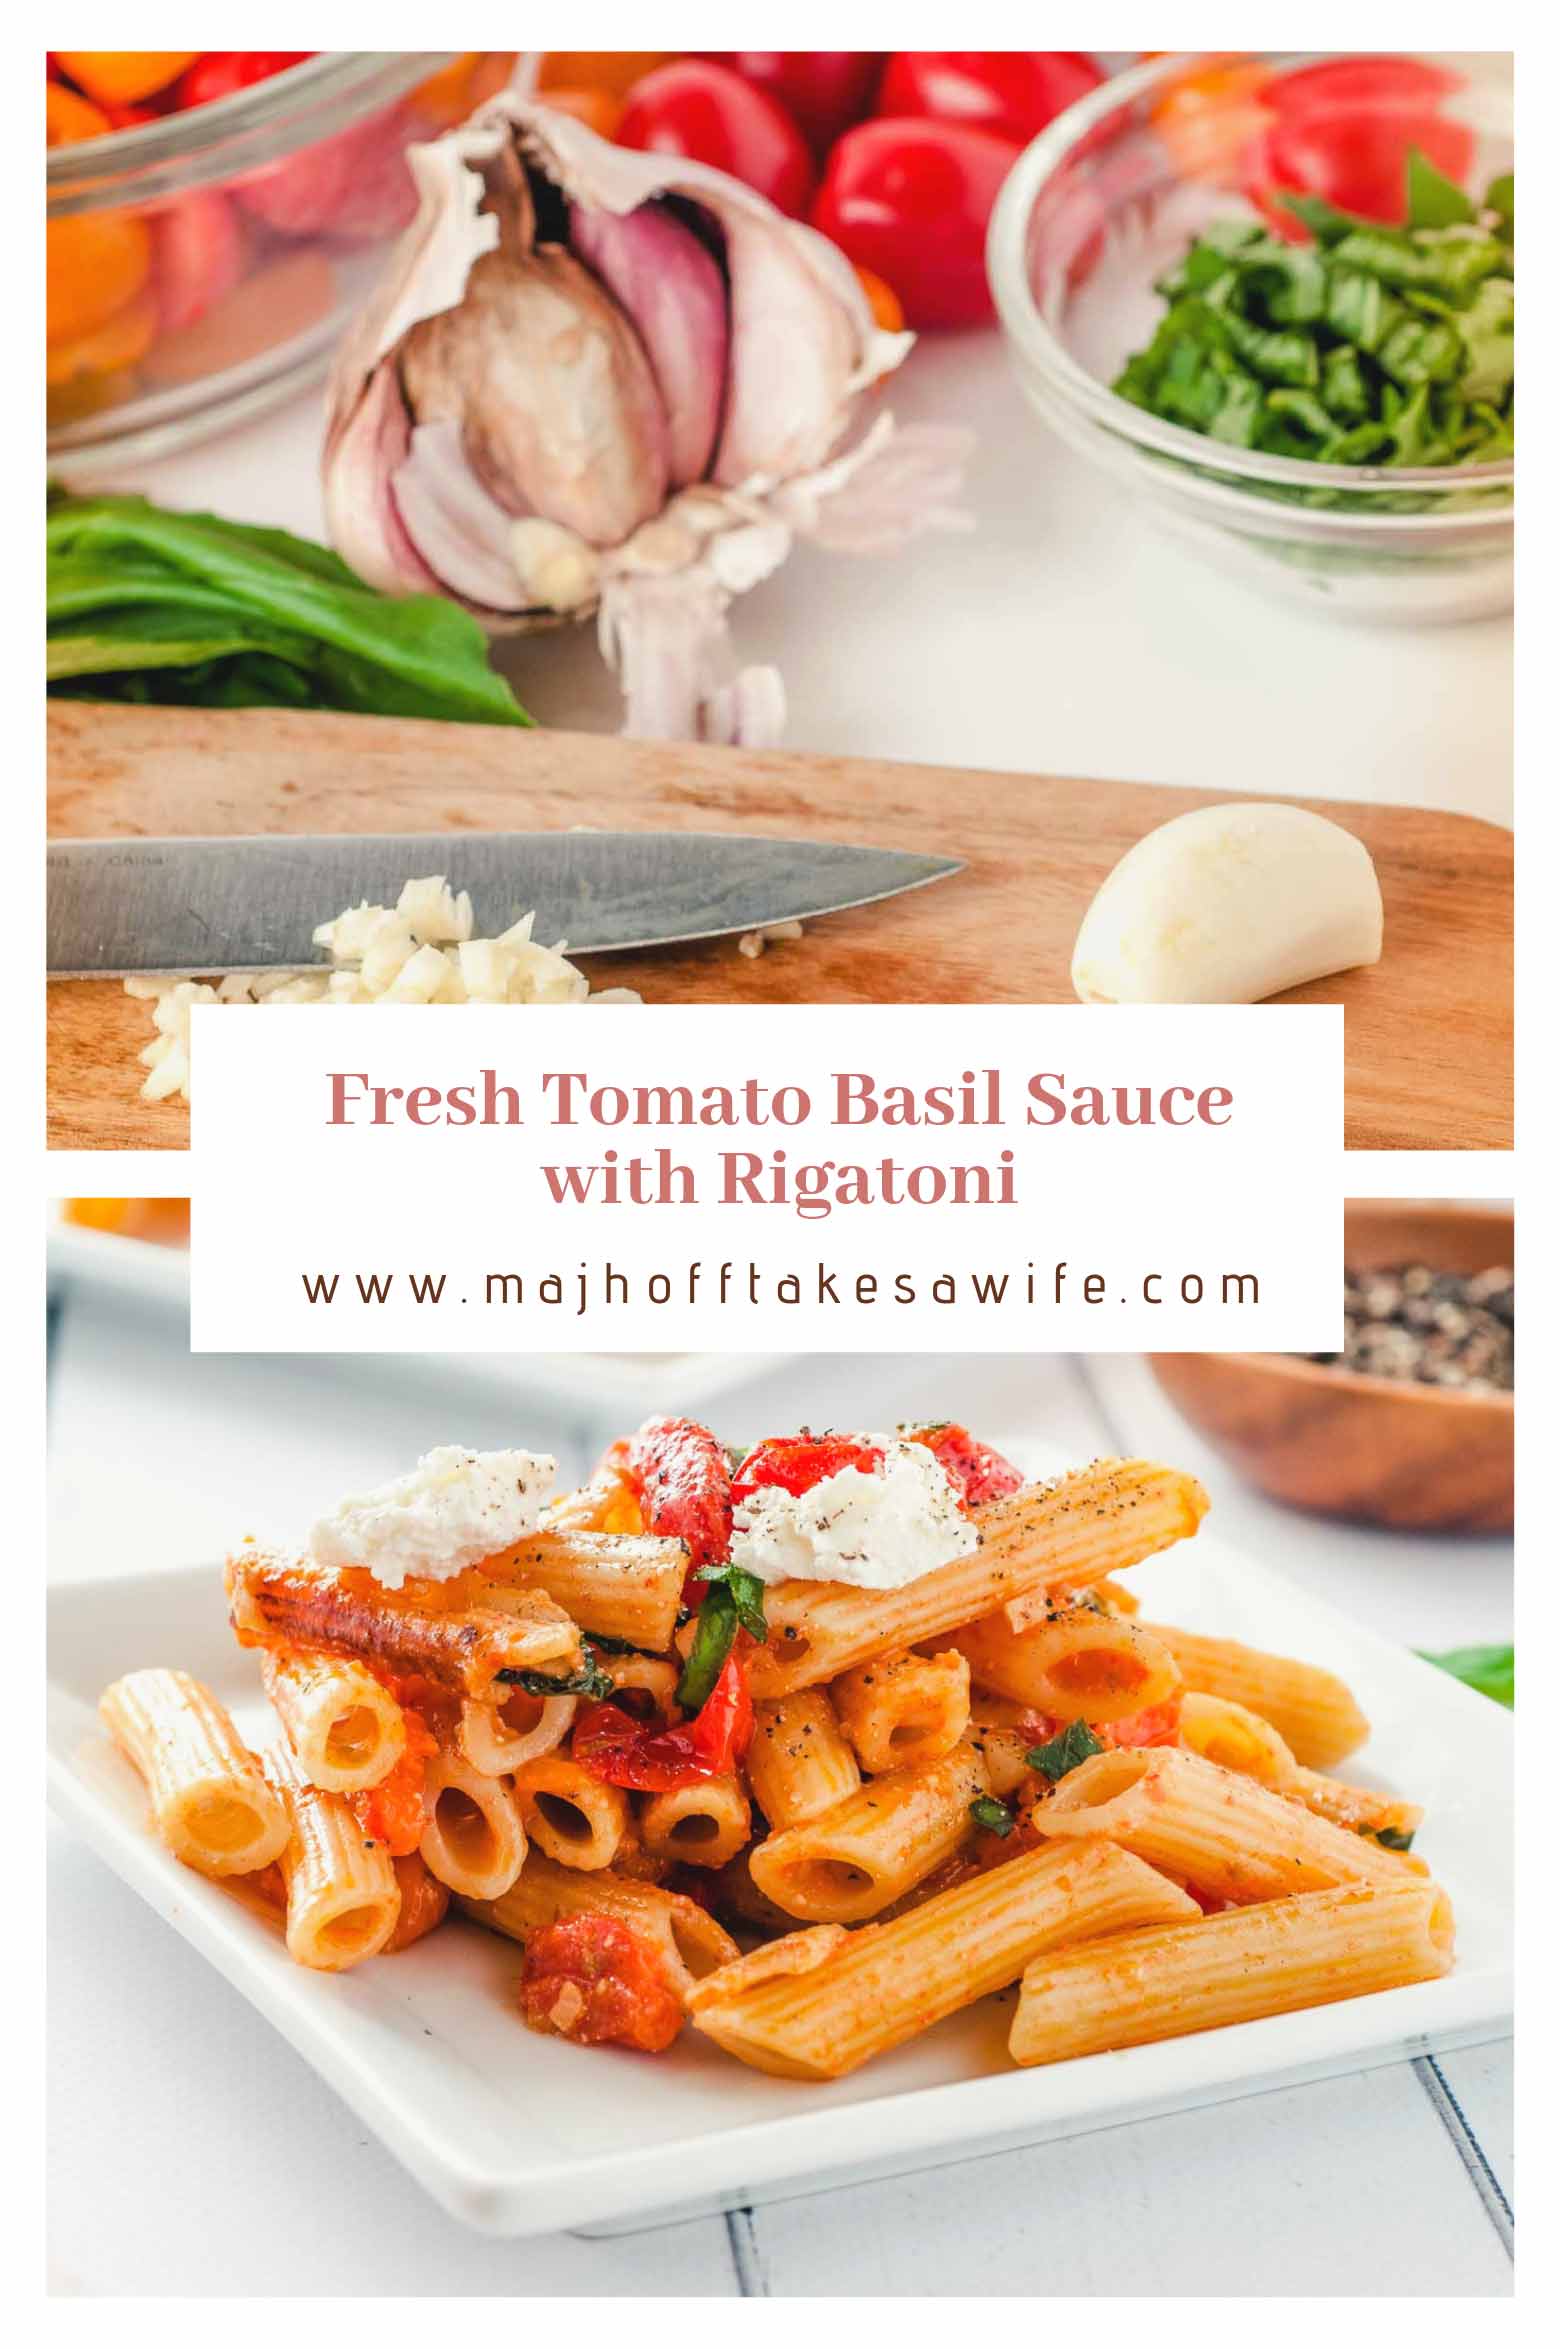 Easy to make homemade fresh tomato basil pasta sauce will become one of your favorite go to recipes! Serve with a side salad, and top with ricotta or mozzarella cheese for a quick and healthy weeknight meal. Stir in more ricotta to make it creamy, or add chicken or serve with sausage for more protein. Use cherry tomatoes or even mix in sun-dried tomatoes for a twist. Rigatoni noodles hold the sauce well, but feel free to use your favorite noodles. via @mrsmajorhoff